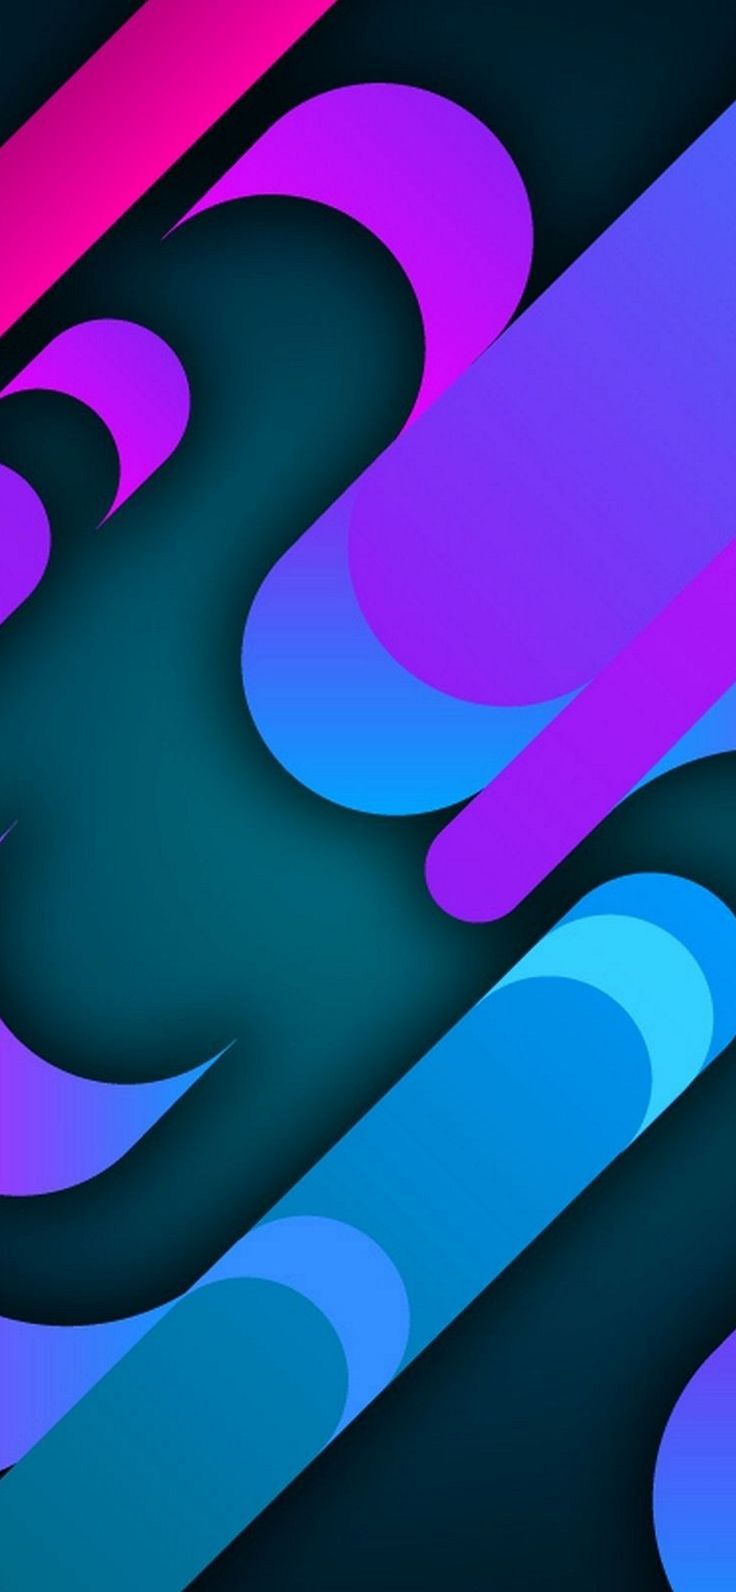 iOS iPhone X, XS, XR, XS Max, purple, blue, clean, pattern, simple, abstract, appl. Android wallpaper art, Android wallpaper blue, iPhone homescreen wallpaper